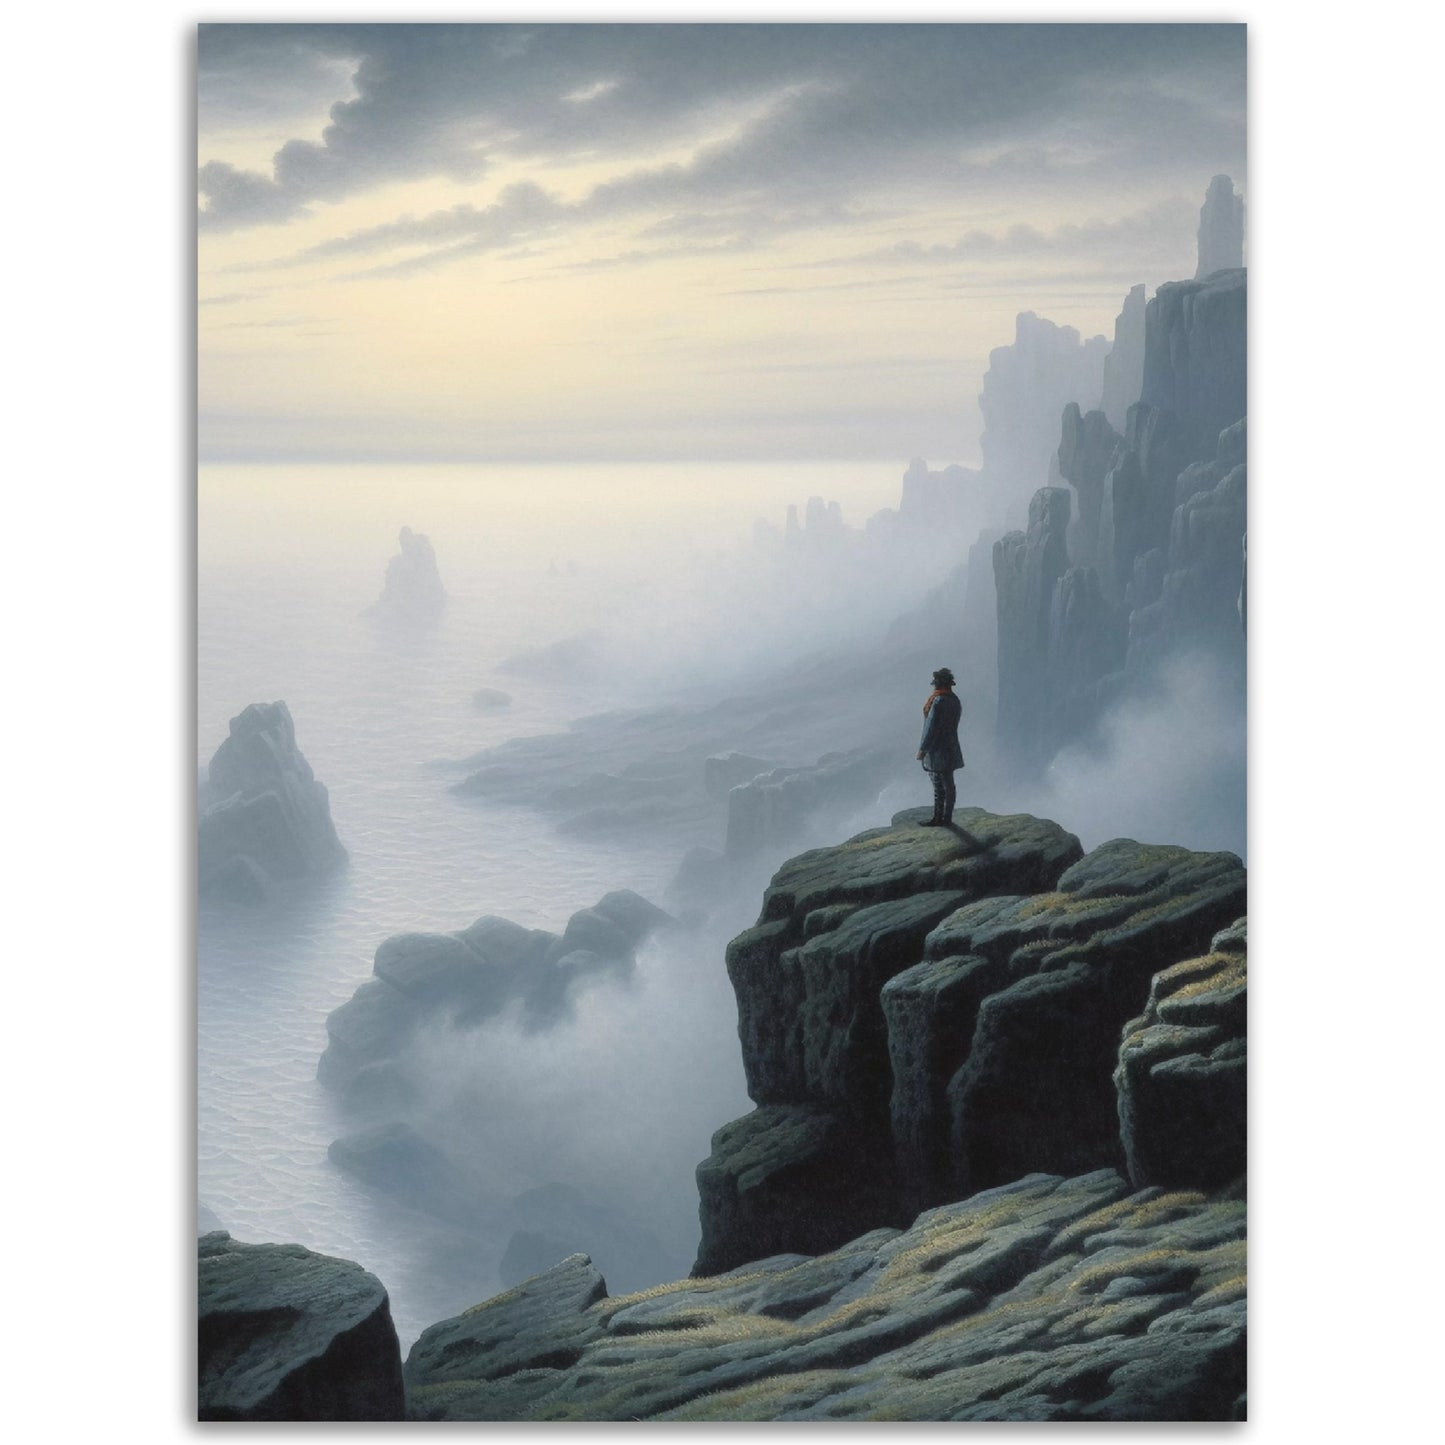 A high-quality poster of The Voyager's Solitude, perfect for room decoration or to enhance your poster wall art.